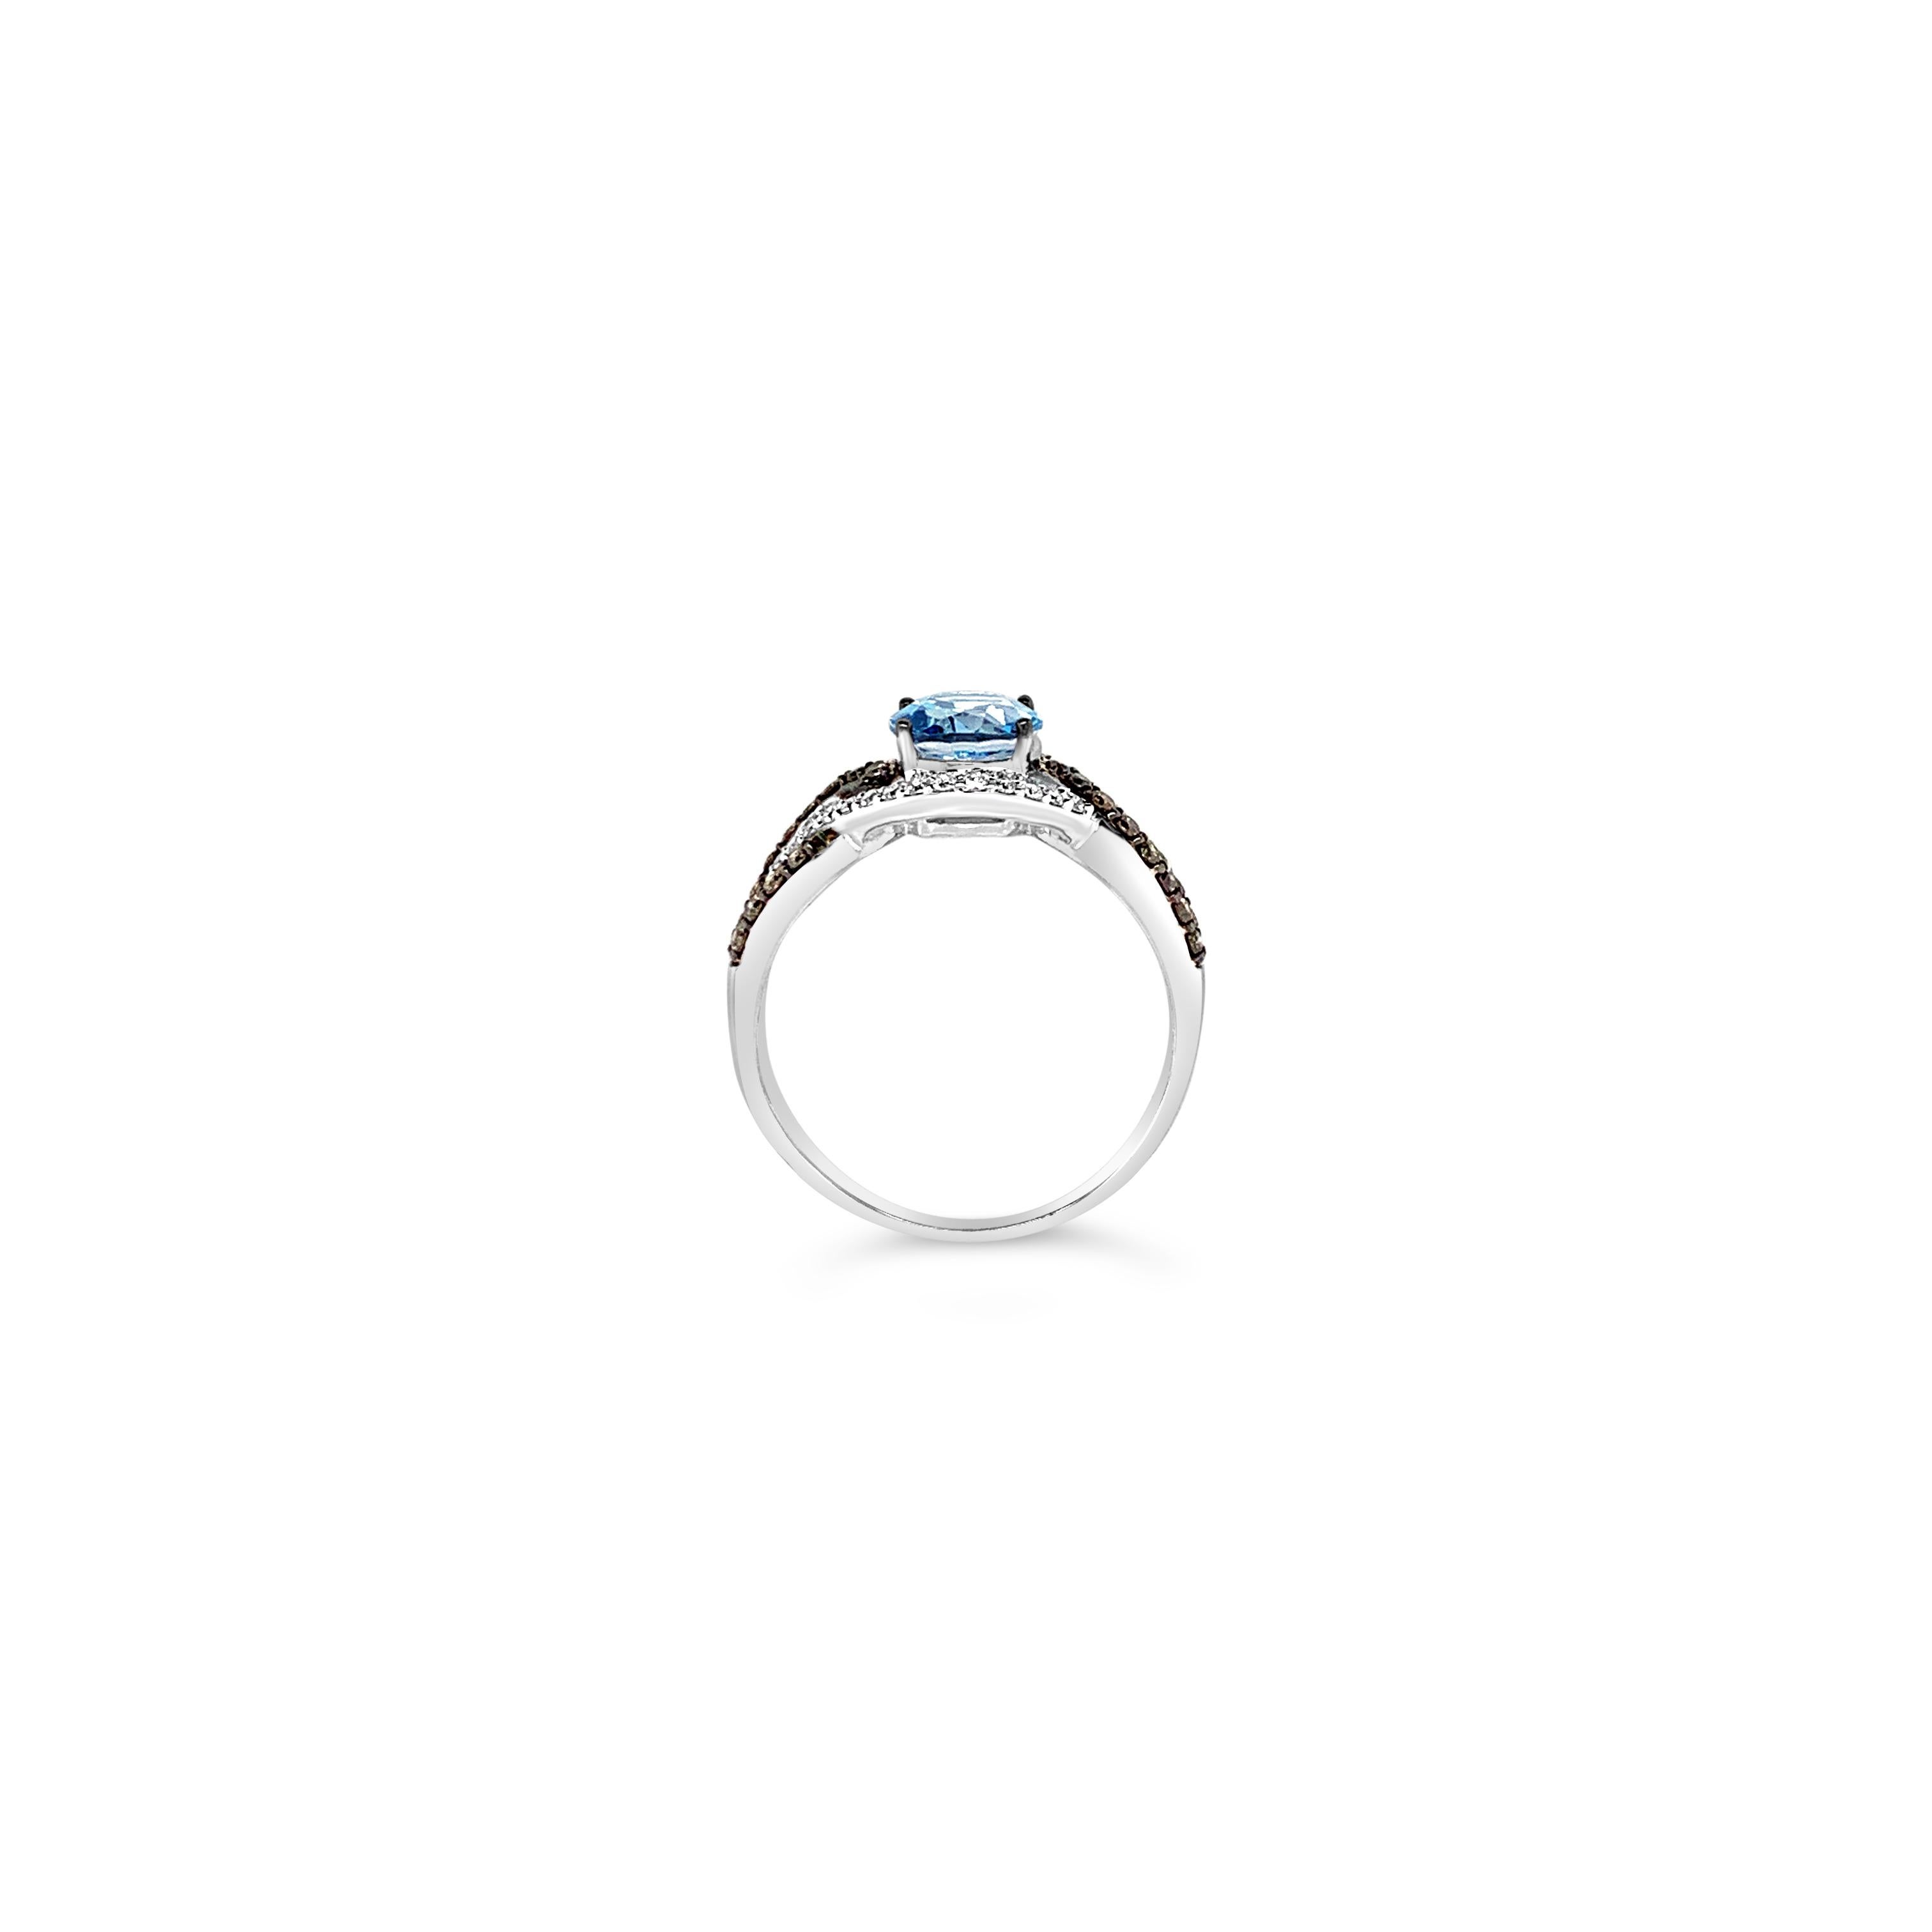 Le Vian® Ring featuring 2.30 cts. Ocean Blue Topaz, 0.30 cts. Chocolate Diamonds® , 0.22 cts. Vanilla Diamonds® set in 14K Vanilla Gold®

Diamonds Breakdown:
.30 cts Brown Diamonds
.22 cts White Diamonds

Gems Breakdown:
2.30 cts Blue Topaz

Ring